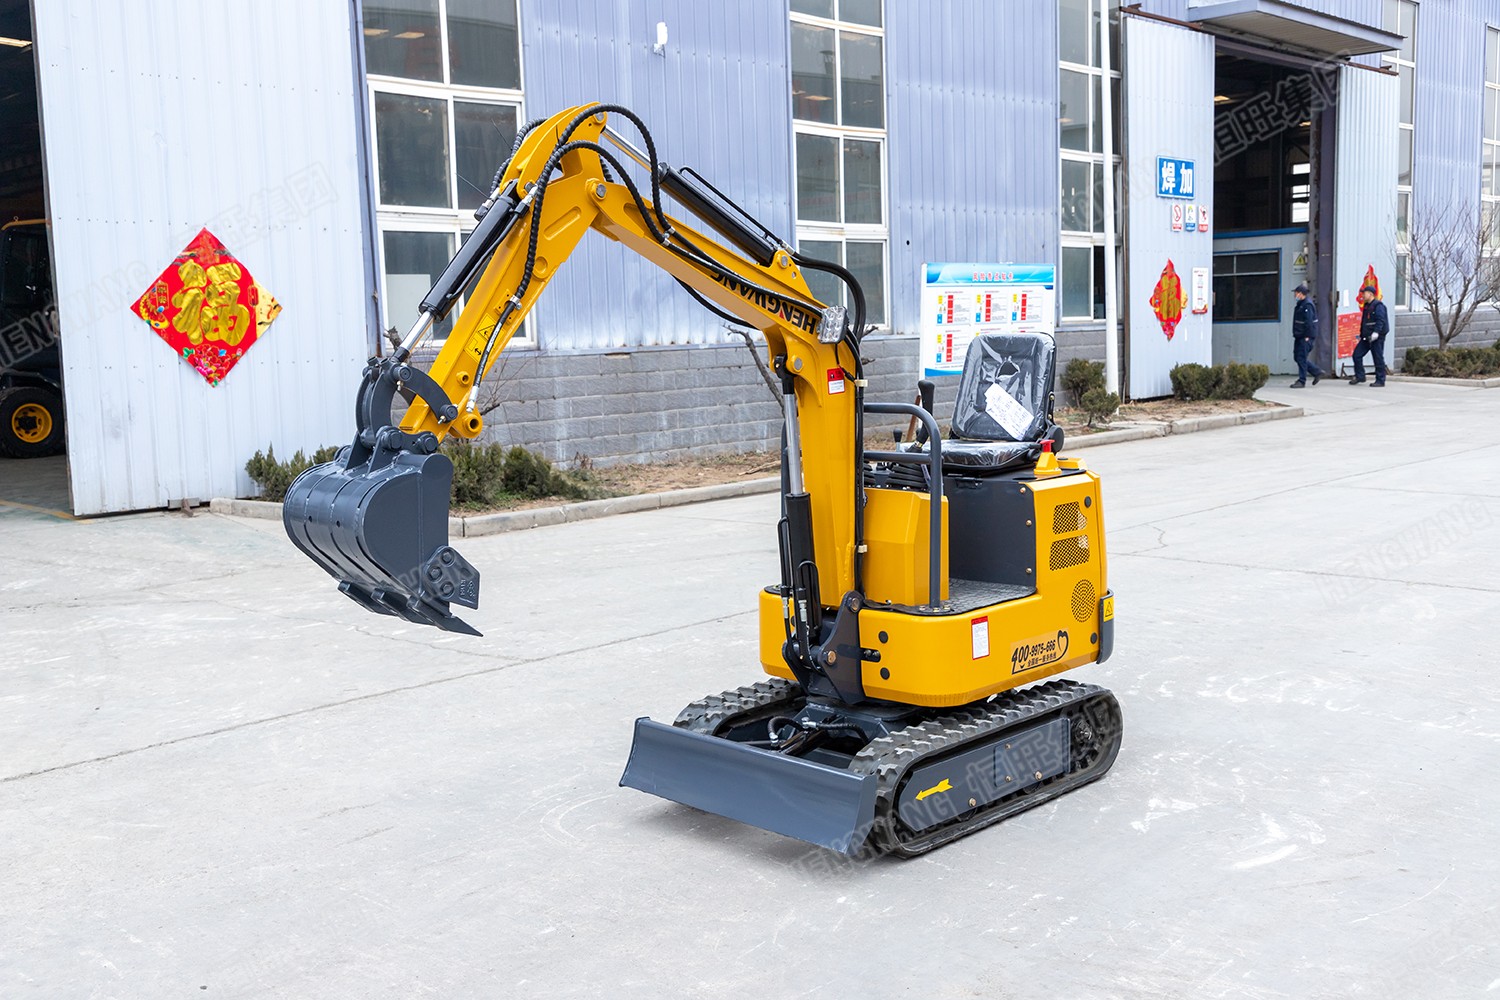 How to maintain a long service life for small excavators